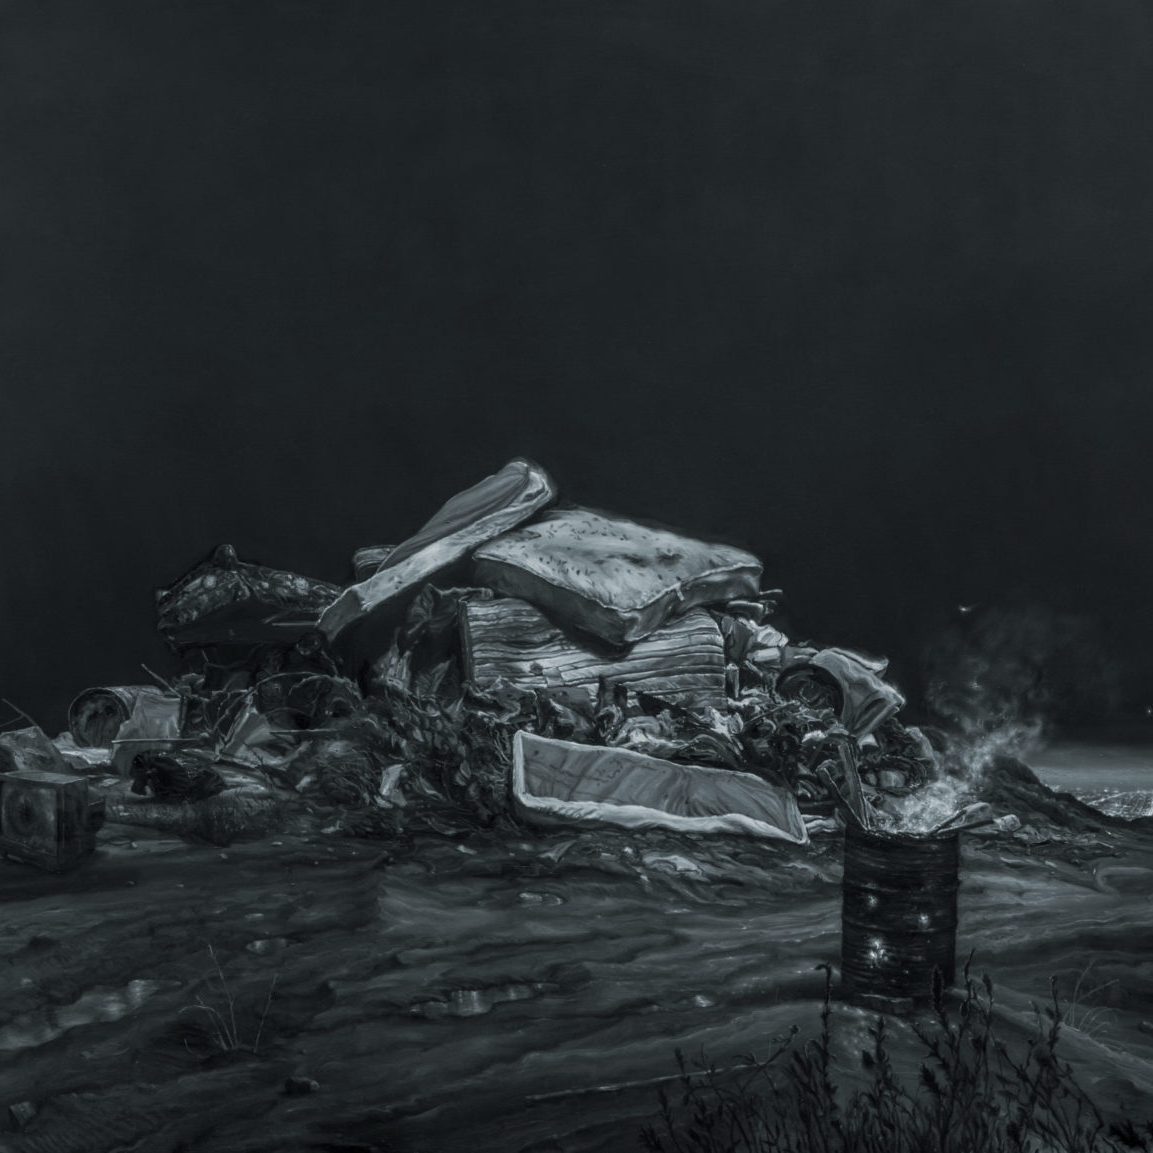 Close up photo of "The City II" by Vincent Valdez, the detail shows a pile of mattresses, broken chairs, broken television and other garbage next to a metal barrel containing pieces of wood that are on fire